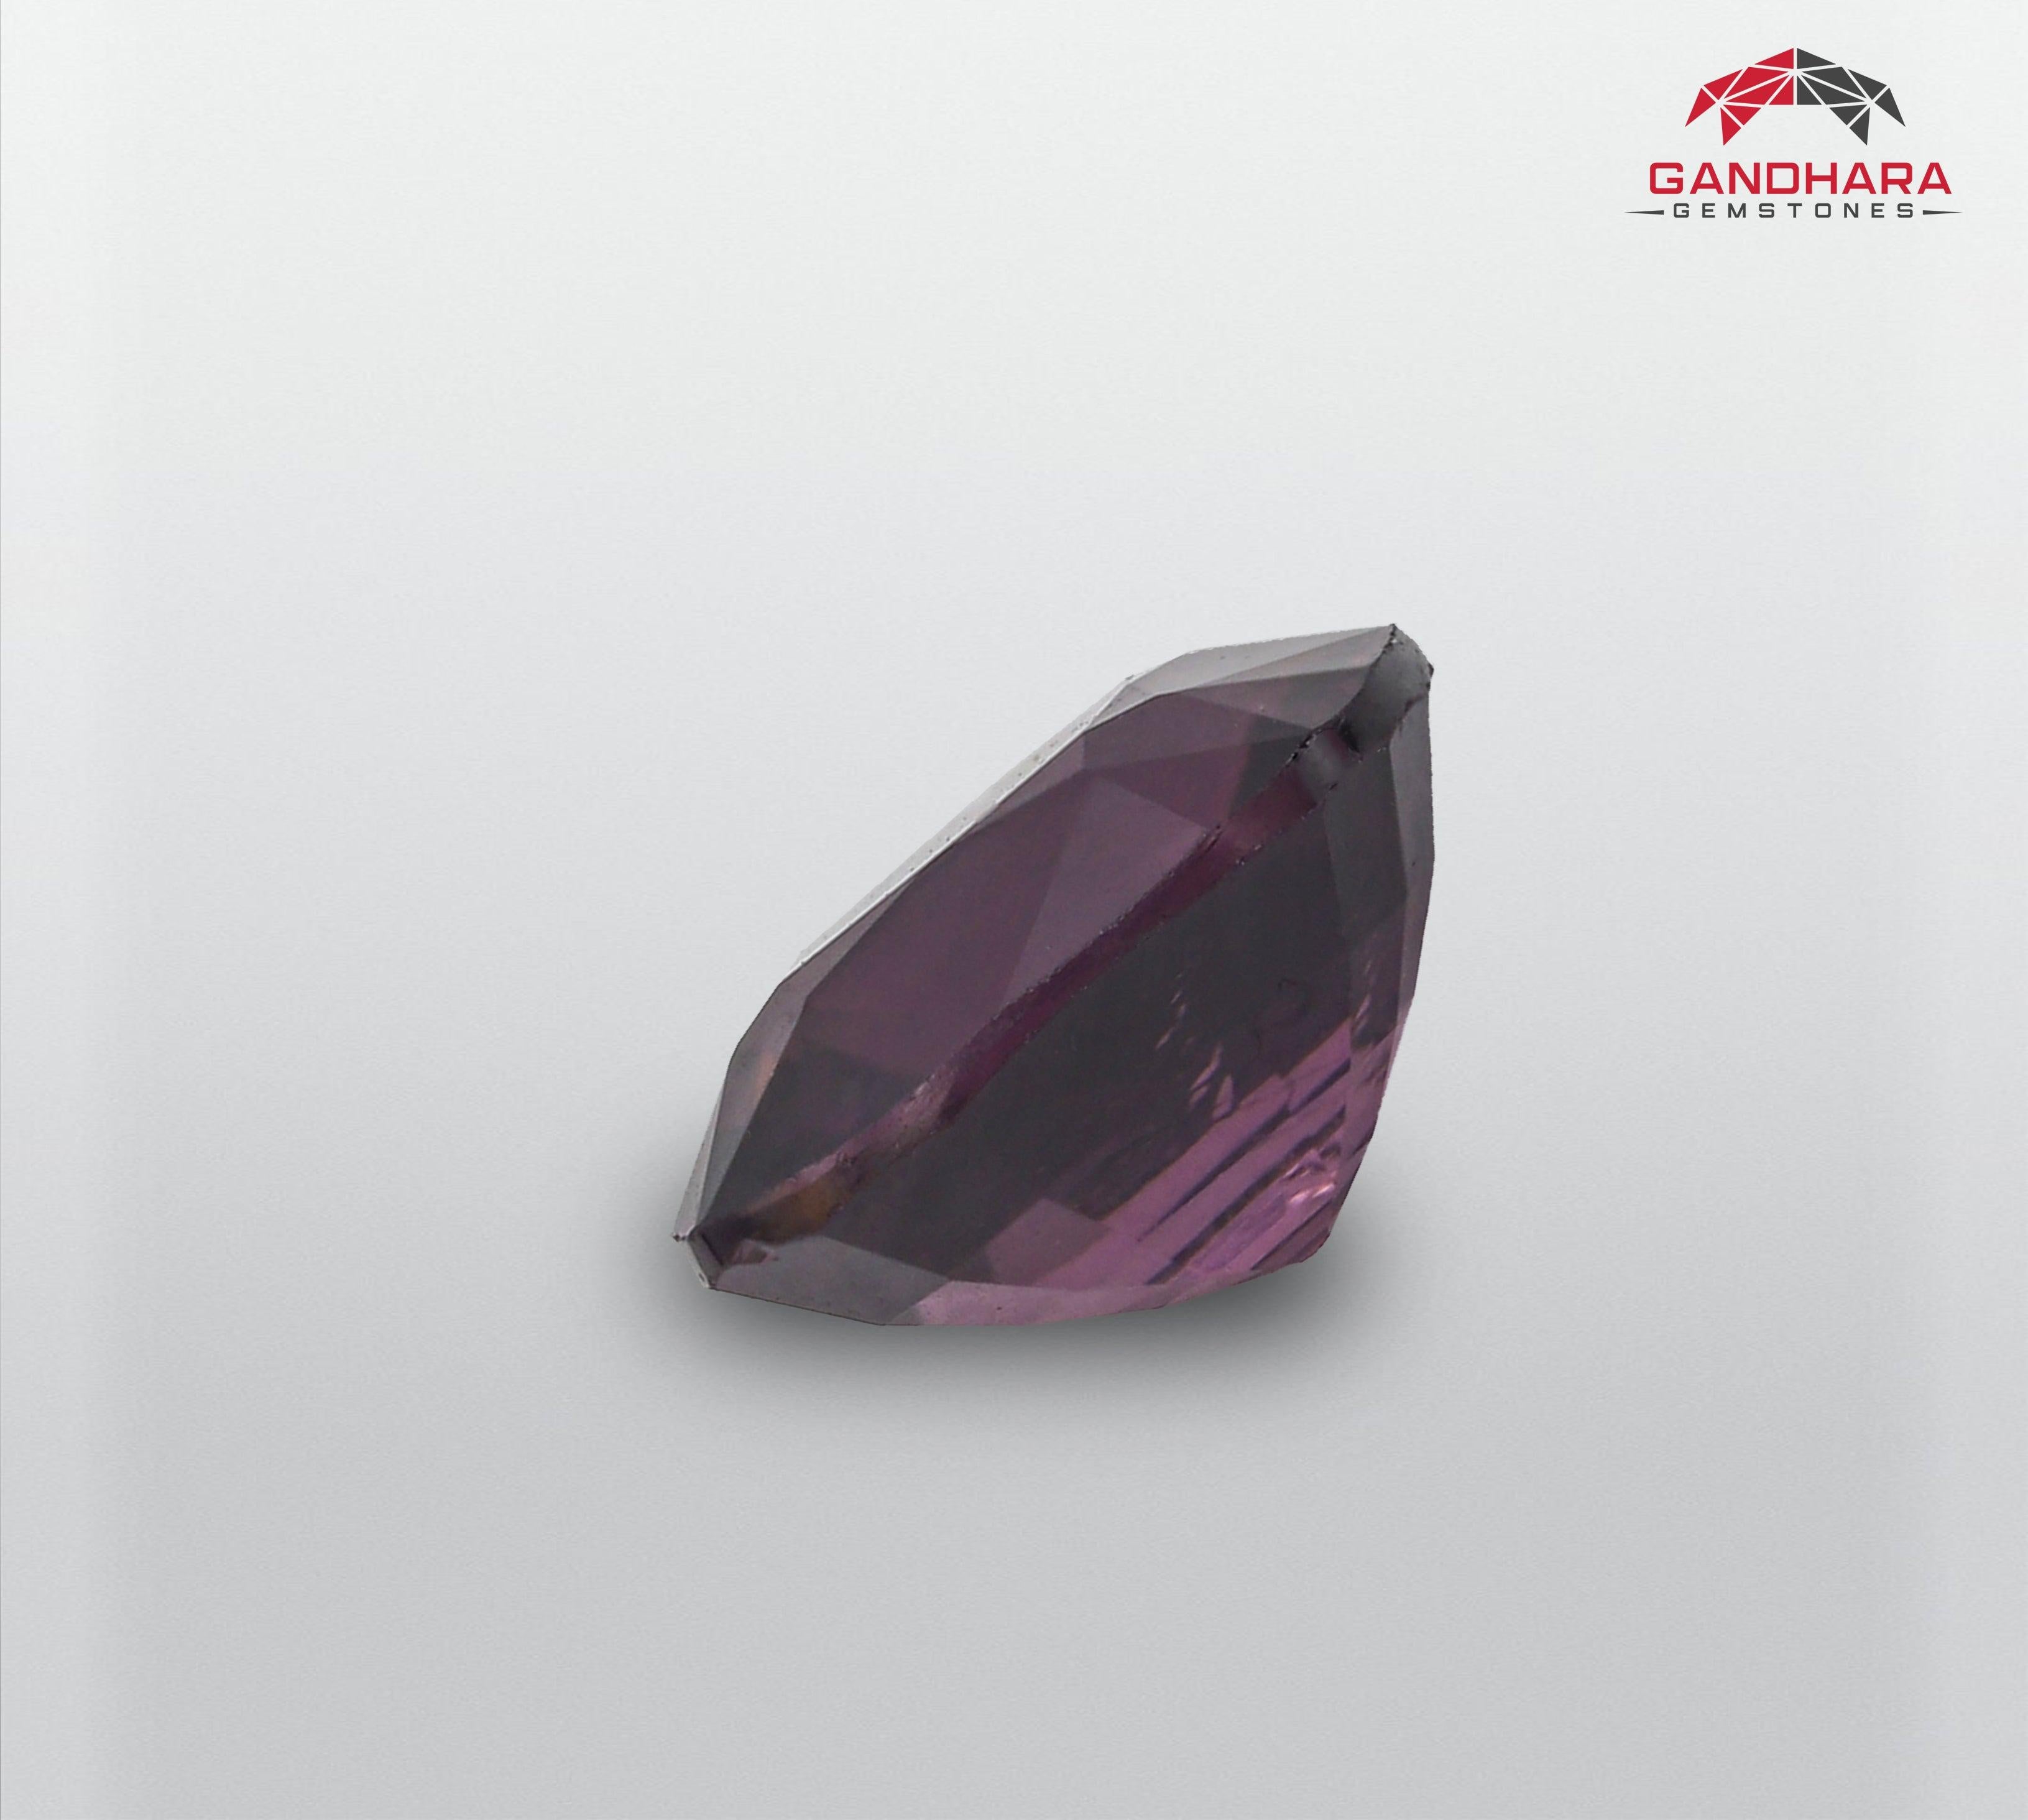 Pinkish Purple Spinel Gemstone, available for sale at wholesale price, Flawless vvs clarity, cushion cut, 1.41 carats loose certified spinel from Burma.

Product Information:
GEMSTONE TYPE	Pinkish Purple Spinel Gemstone
WEIGHT	1.41